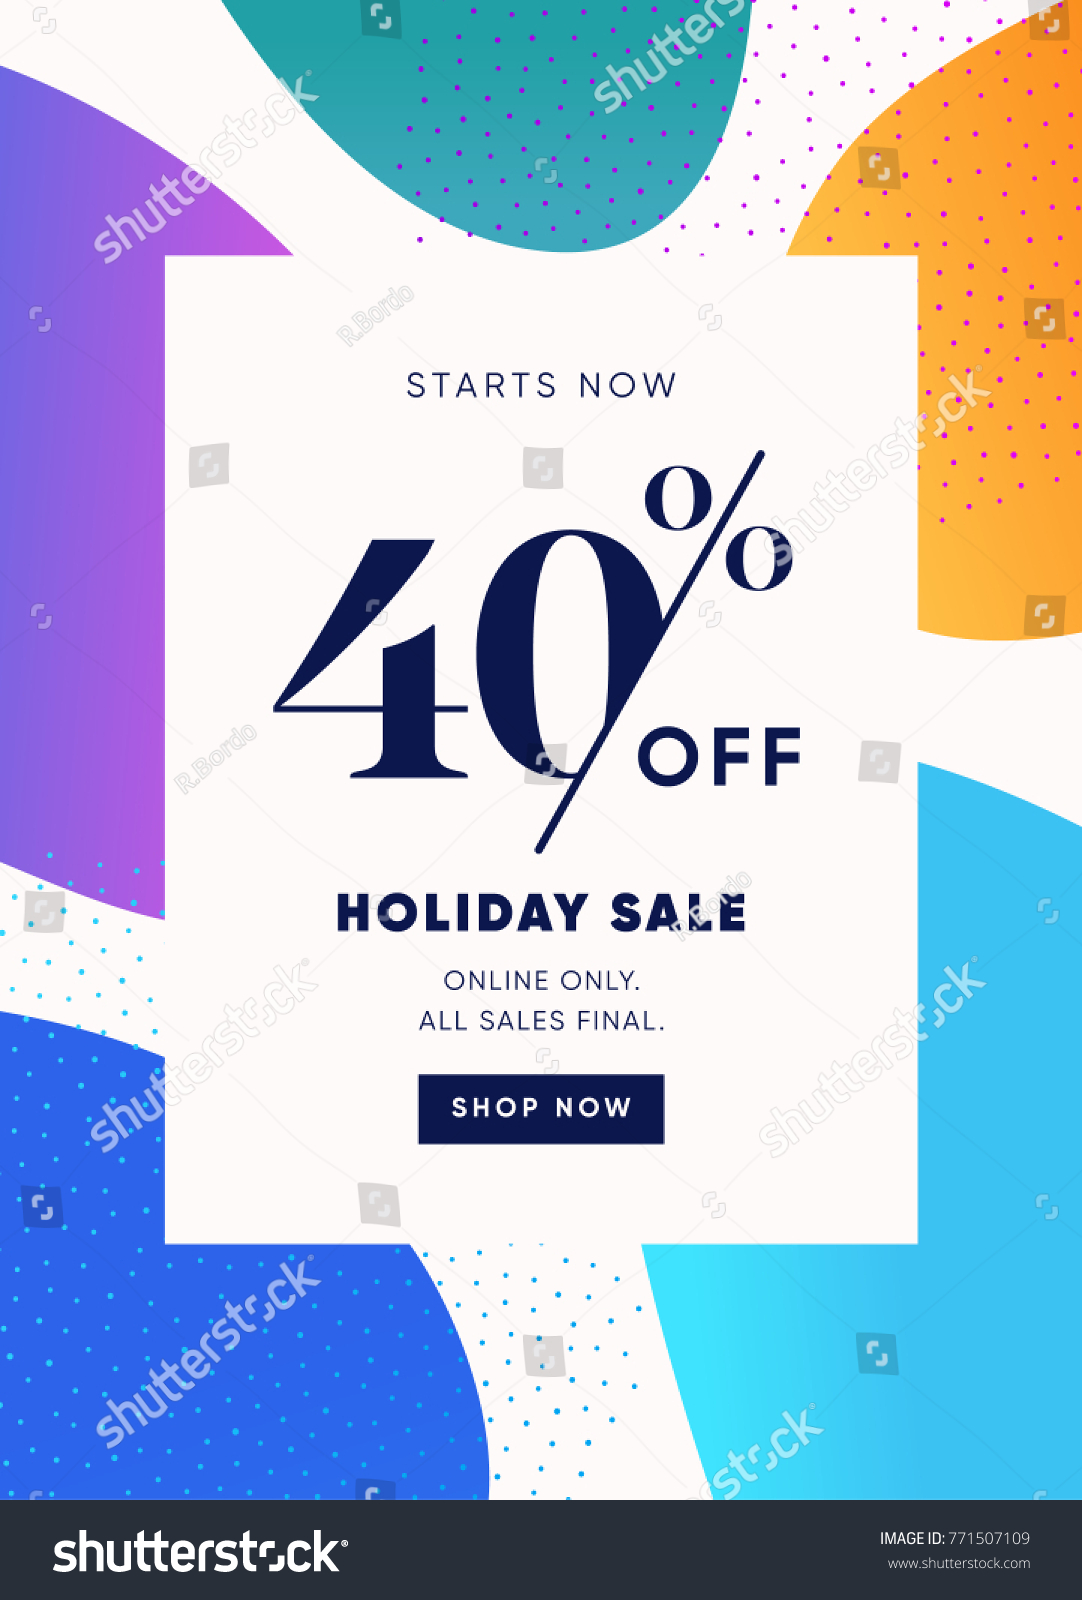 SVG of 40% OFF Special Offer Discount. Big Sale Promotion Vector Poster. Price Discount Offer Design. Season Sale Promo Colorful Abstract Design Sticker or Invitation Coupon. svg